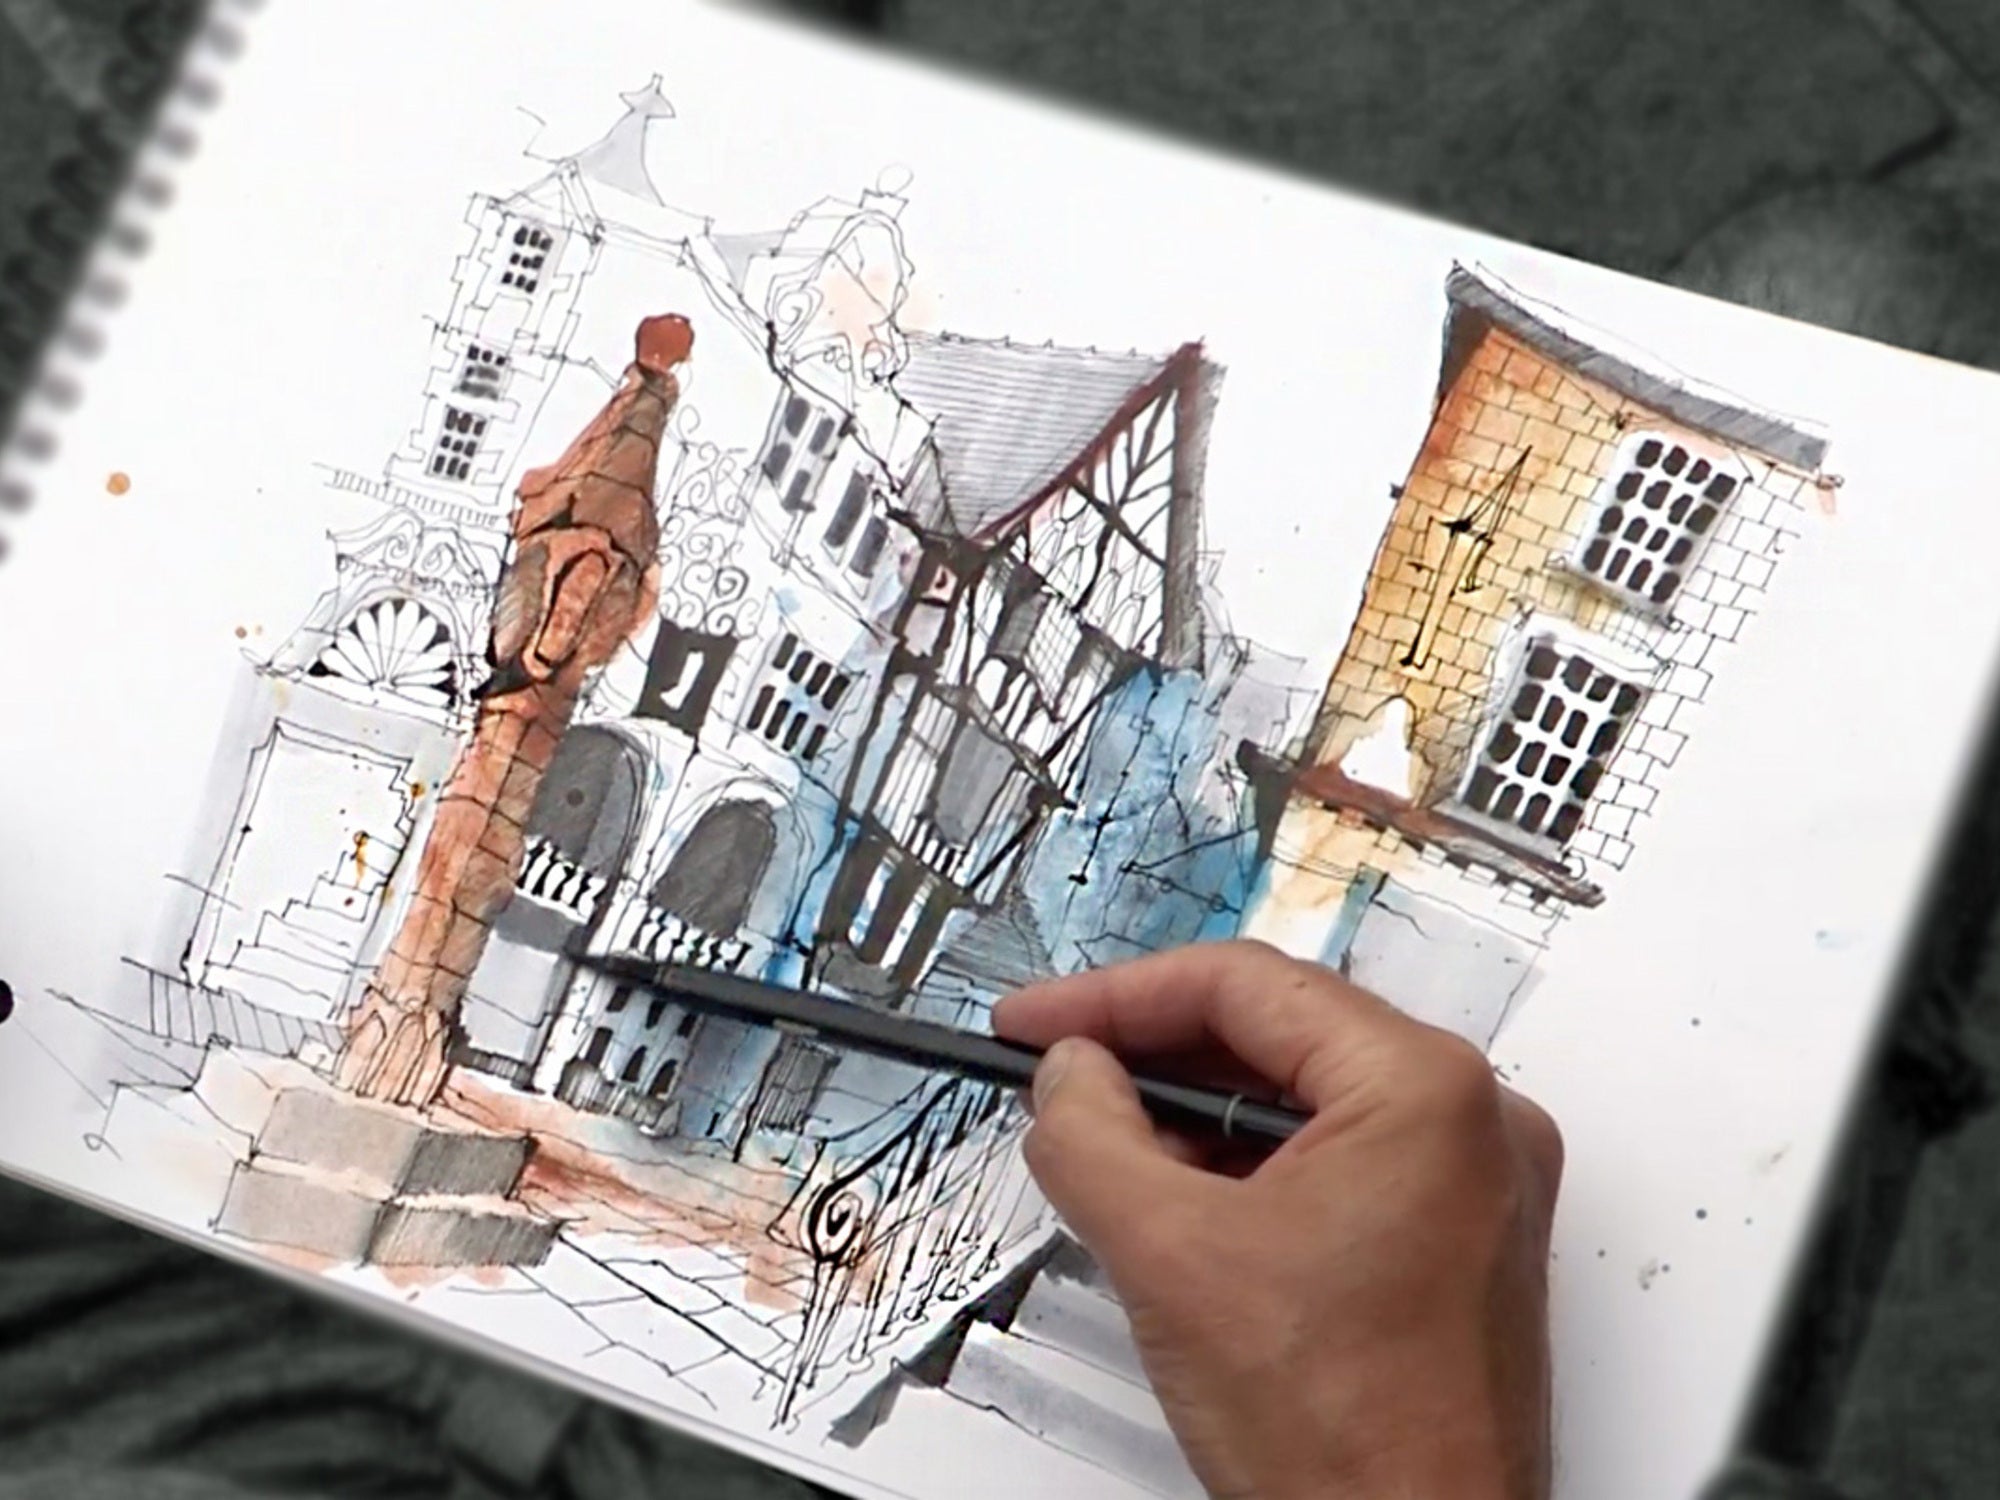 Learn the art of urban sketching with this $40 expert-led course